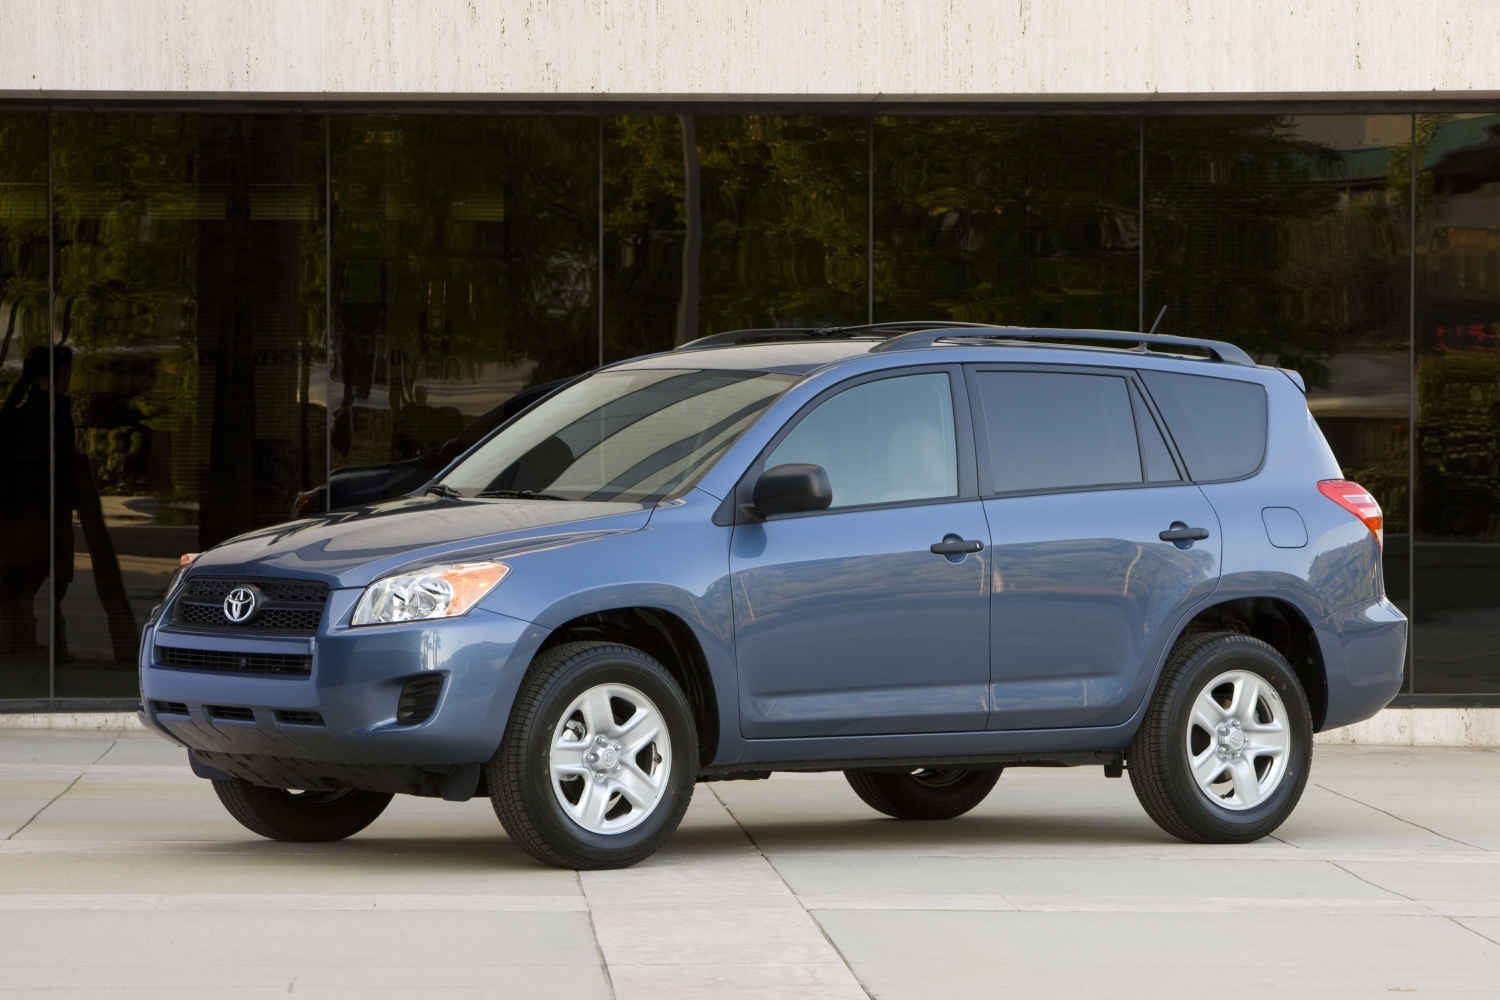 2012 is a reliable used Toyota RAV4 year